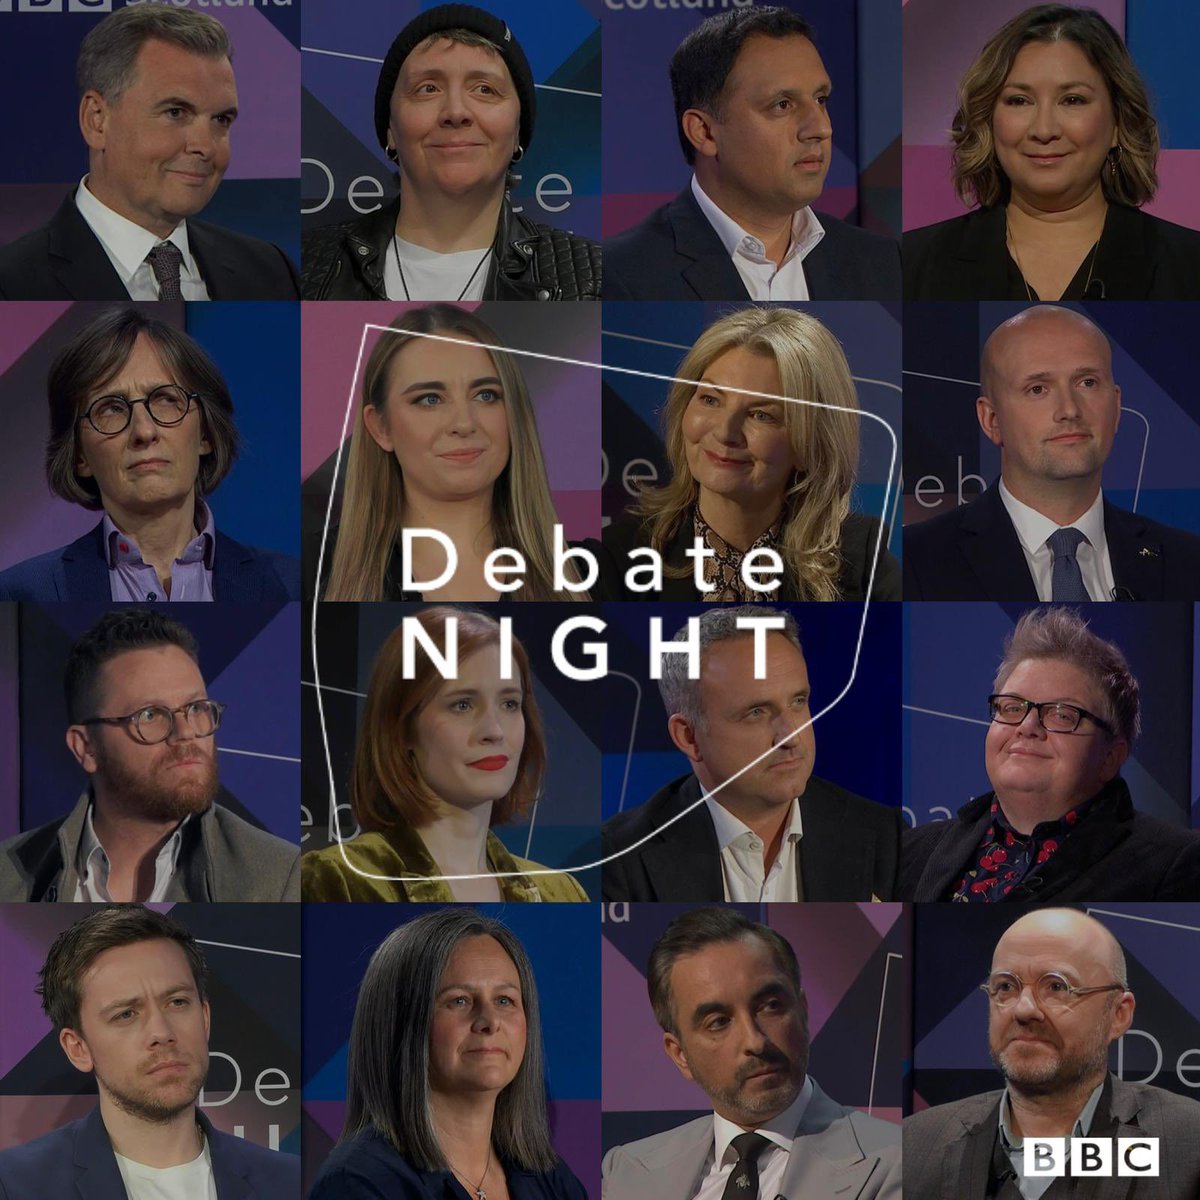 Following First Minister Humza Yousaf’s resignation, Debate Night has been moved to Edinburgh this week Apply here to be part of the audience in a momentous week for Scottish politics: bit.ly/3sILILo #bbcdn